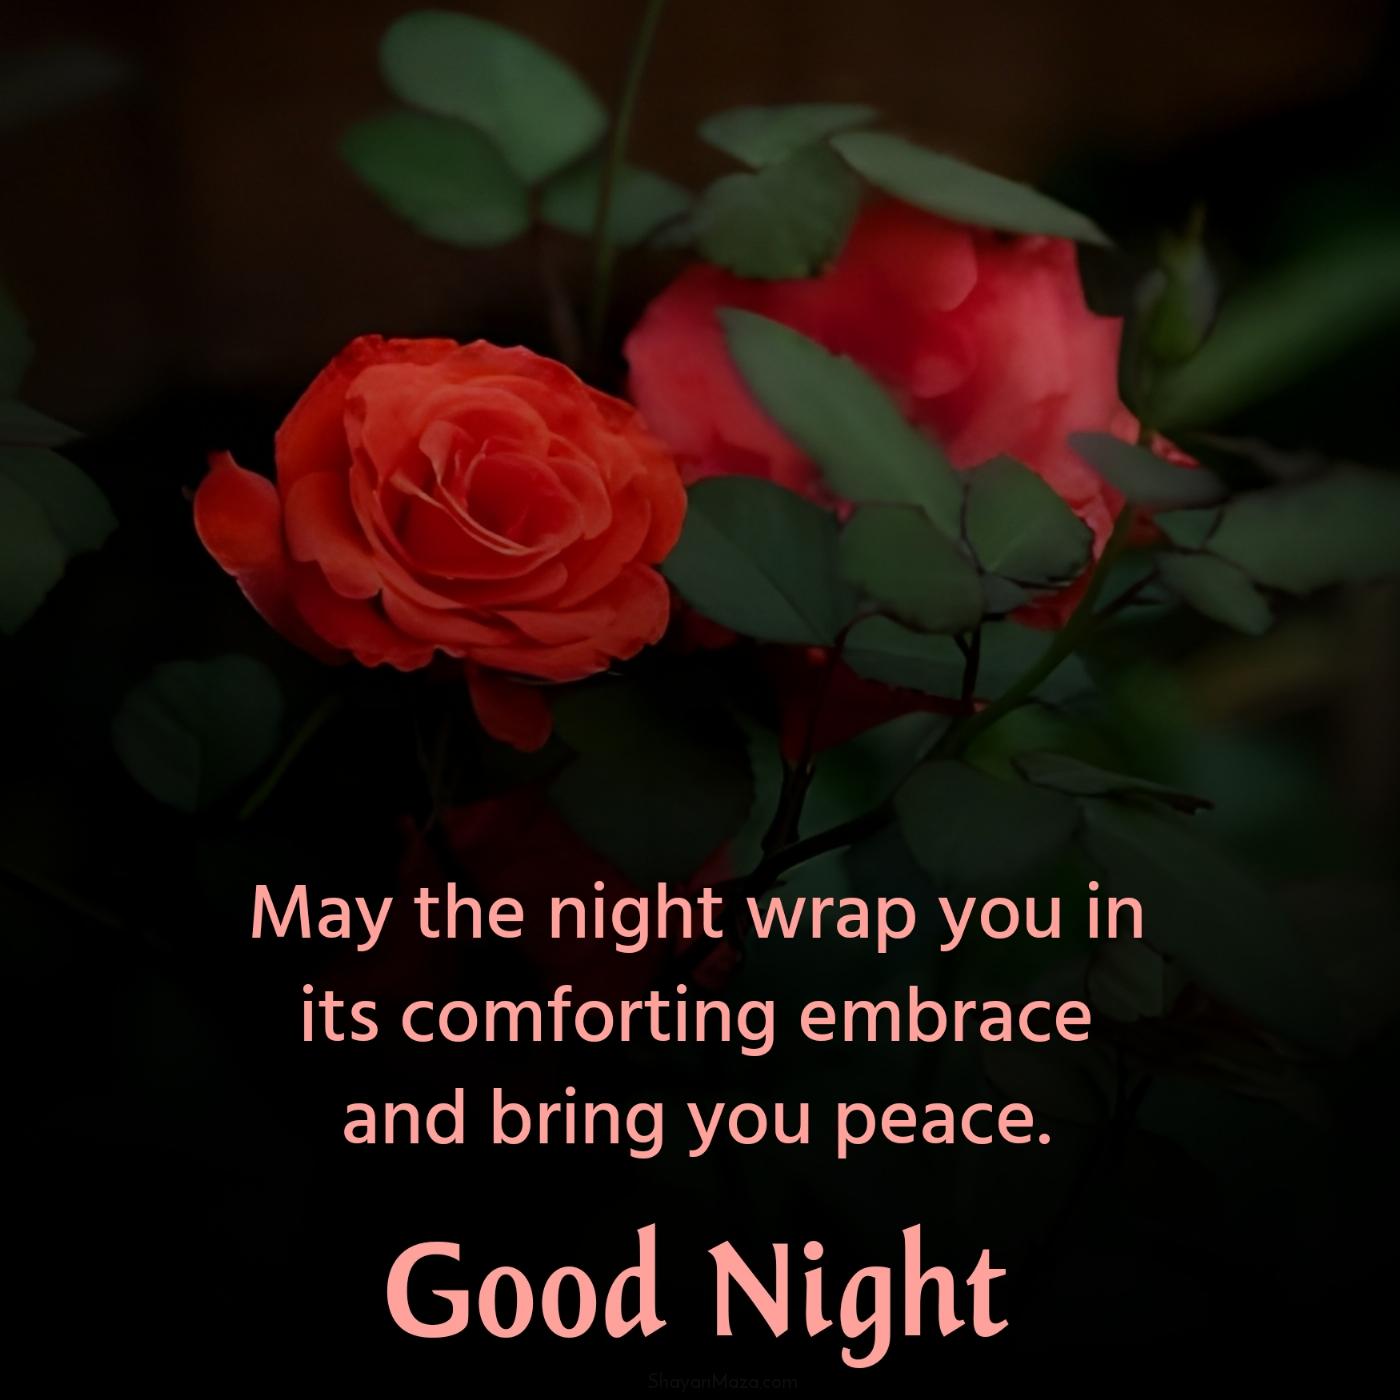 May the night wrap you in its comforting embrace